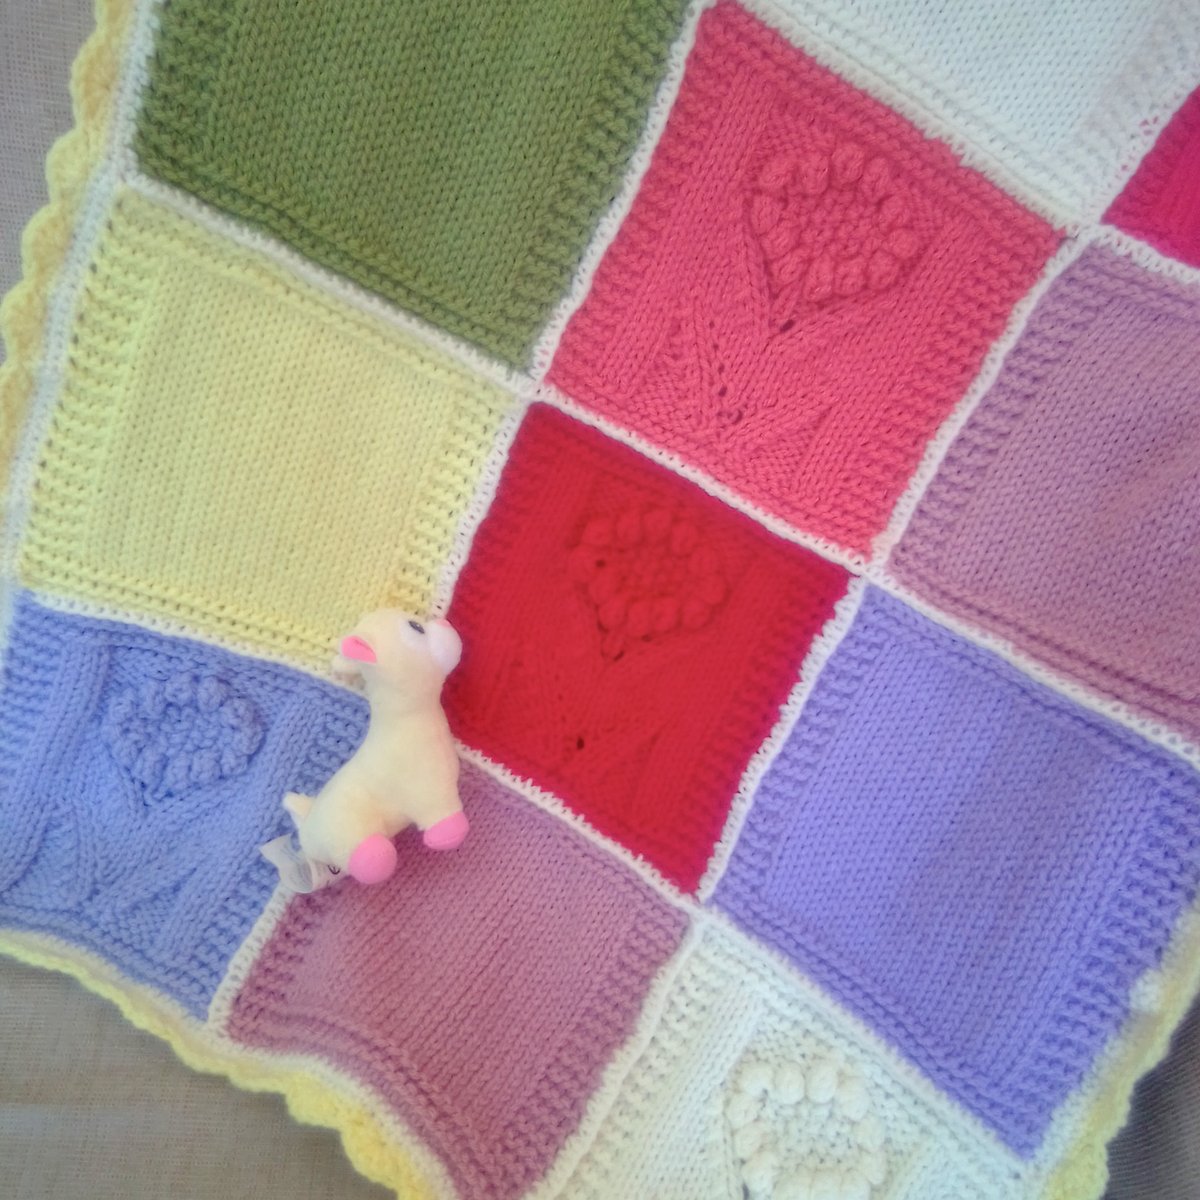 This gorgeous Floral Patchwork Baby Blanket in Chunky Yarn can be made for you in colours of your choice, just let me know which ones. It costs £35 + P&P. folksy.com/items/7916307-… #newonfolksy #folksy365 #creationsfortinytots #blanket #chunkyblanket #floralblanket #babyshowergift